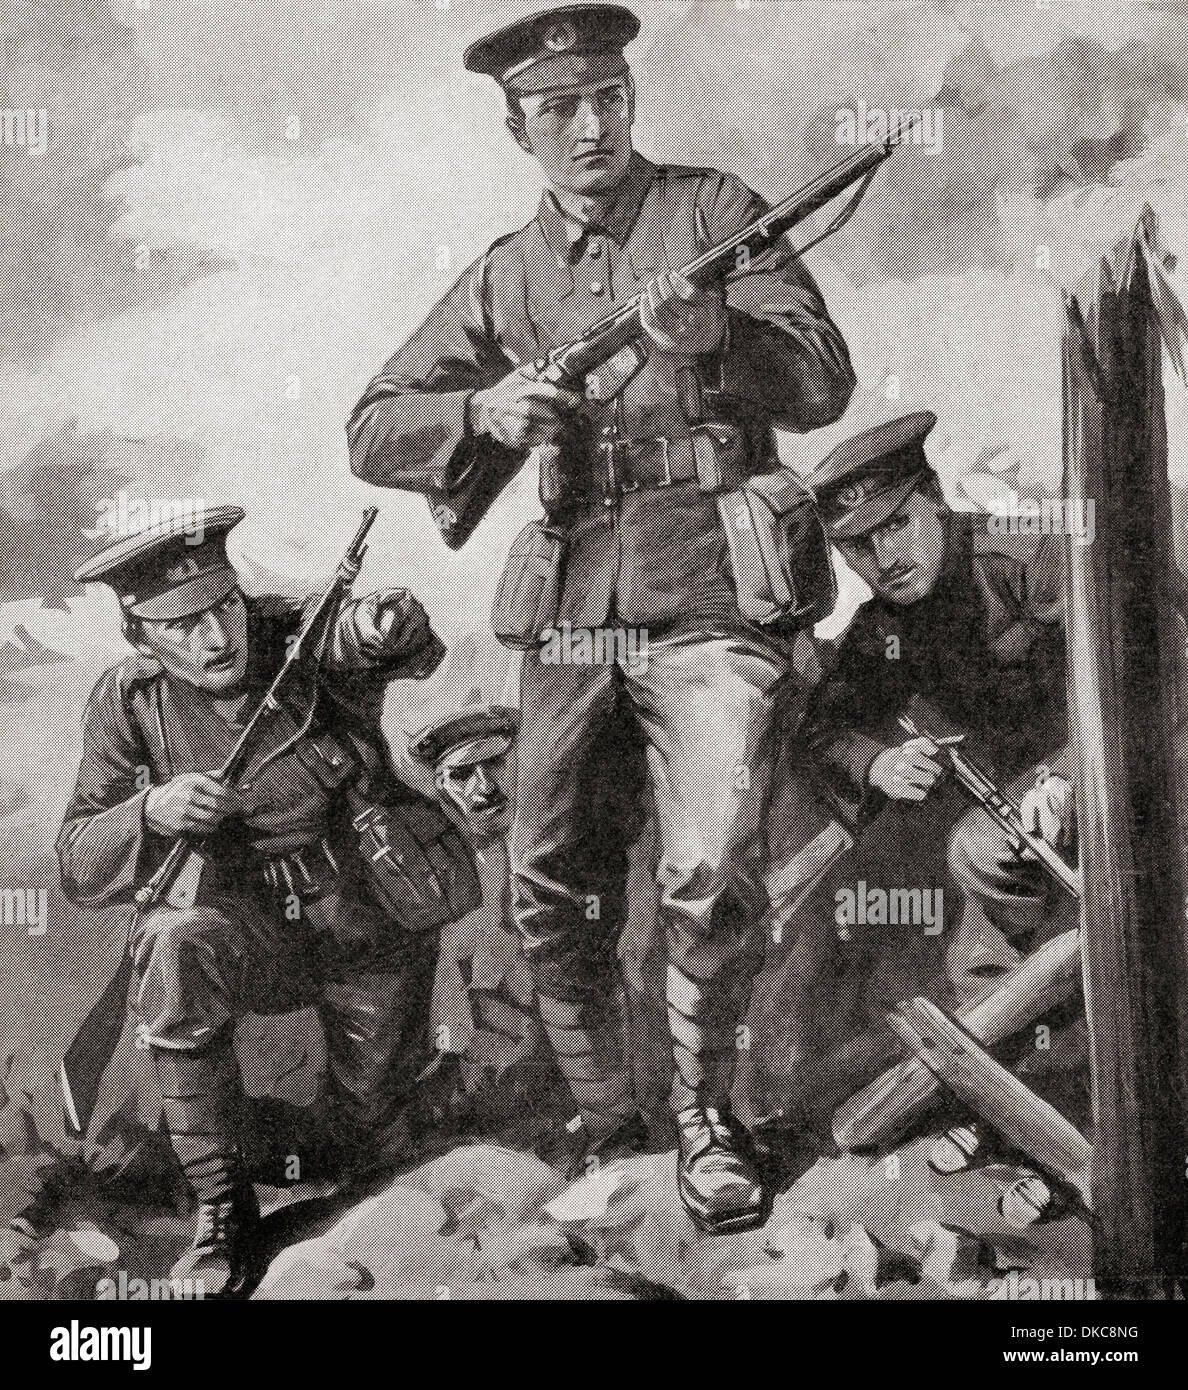 World War One soldiers preparing to meet the enemy. From The War Illustrated Album Deluxe, published 1915. Stock Photo